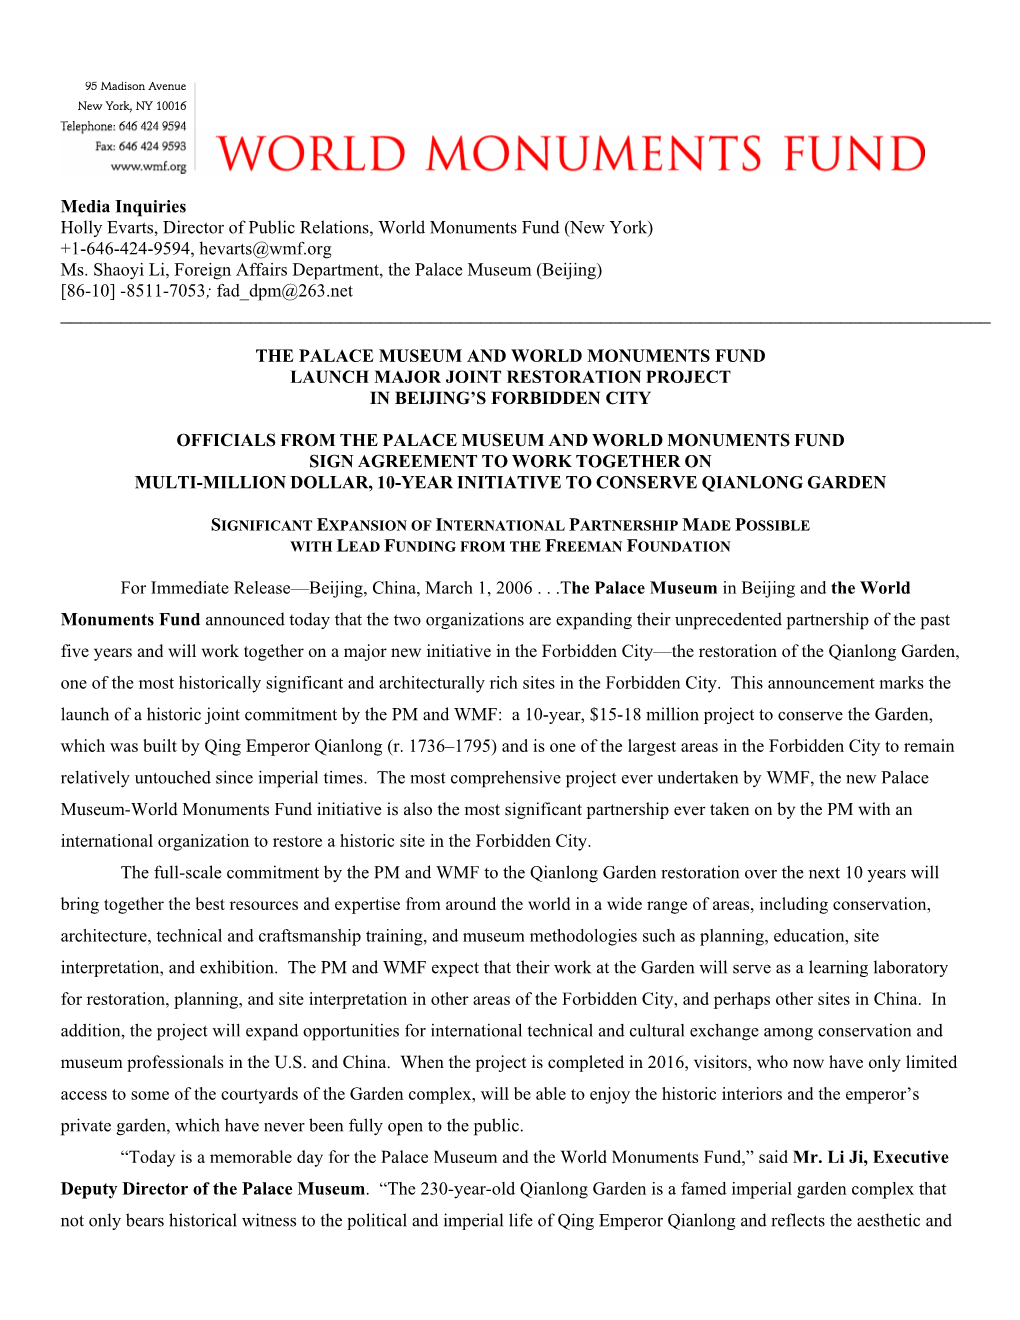 Media Inquiries Holly Evarts, Director of Public Relations, World Monuments Fund (New York) +1-646-424-9594, Hevarts@Wmf.Org Ms